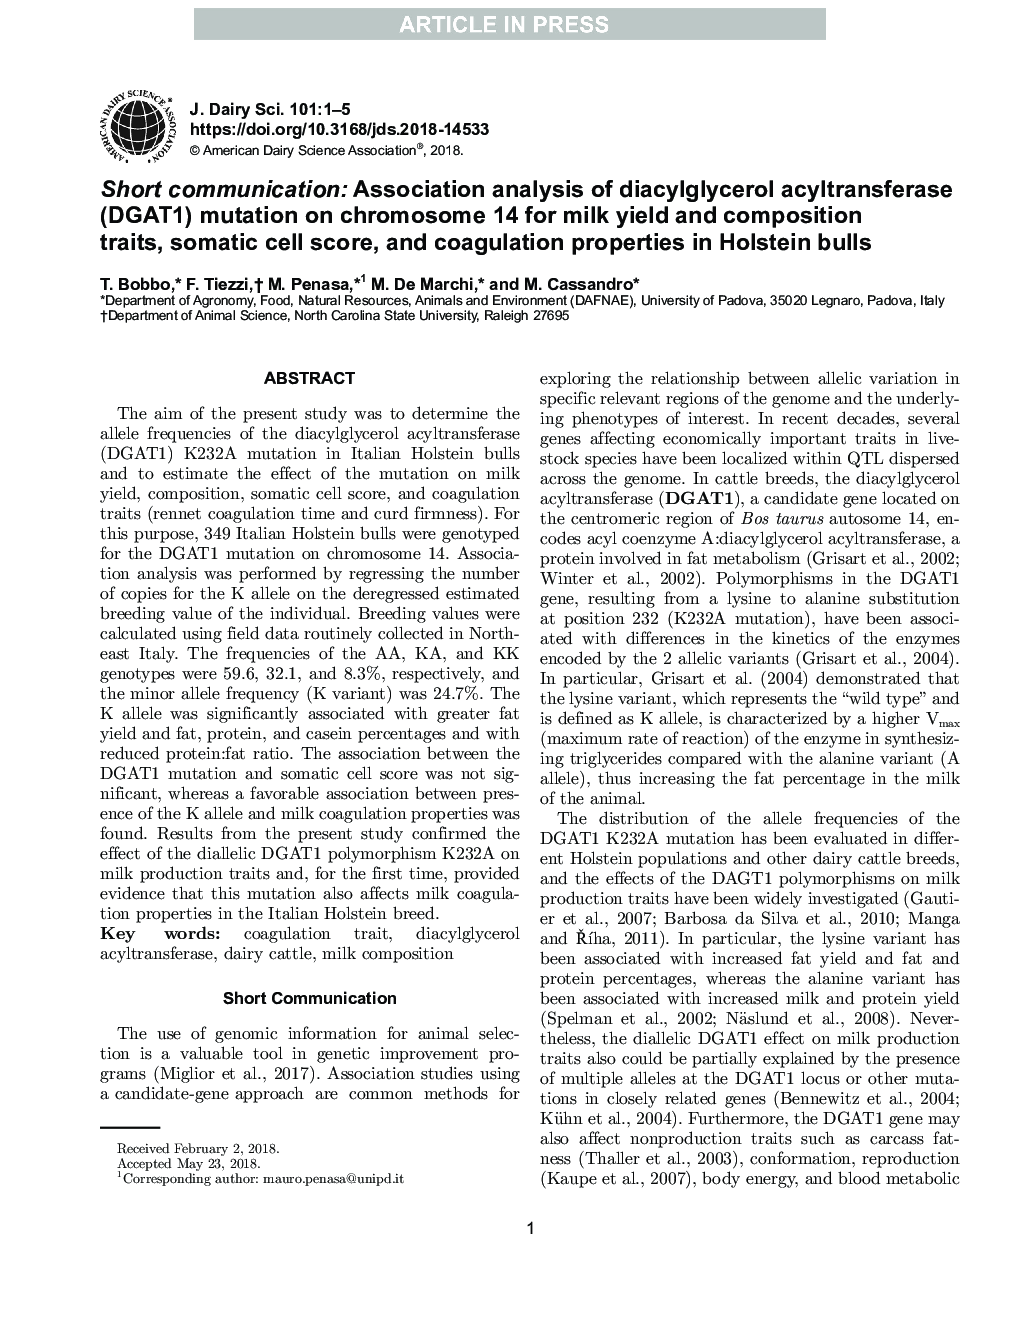 Short communication: Association analysis of diacylglycerol acyltransferase (DGAT1) mutation on chromosome 14 for milk yield and composition traits, somatic cell score, and coagulation properties in Holstein bulls